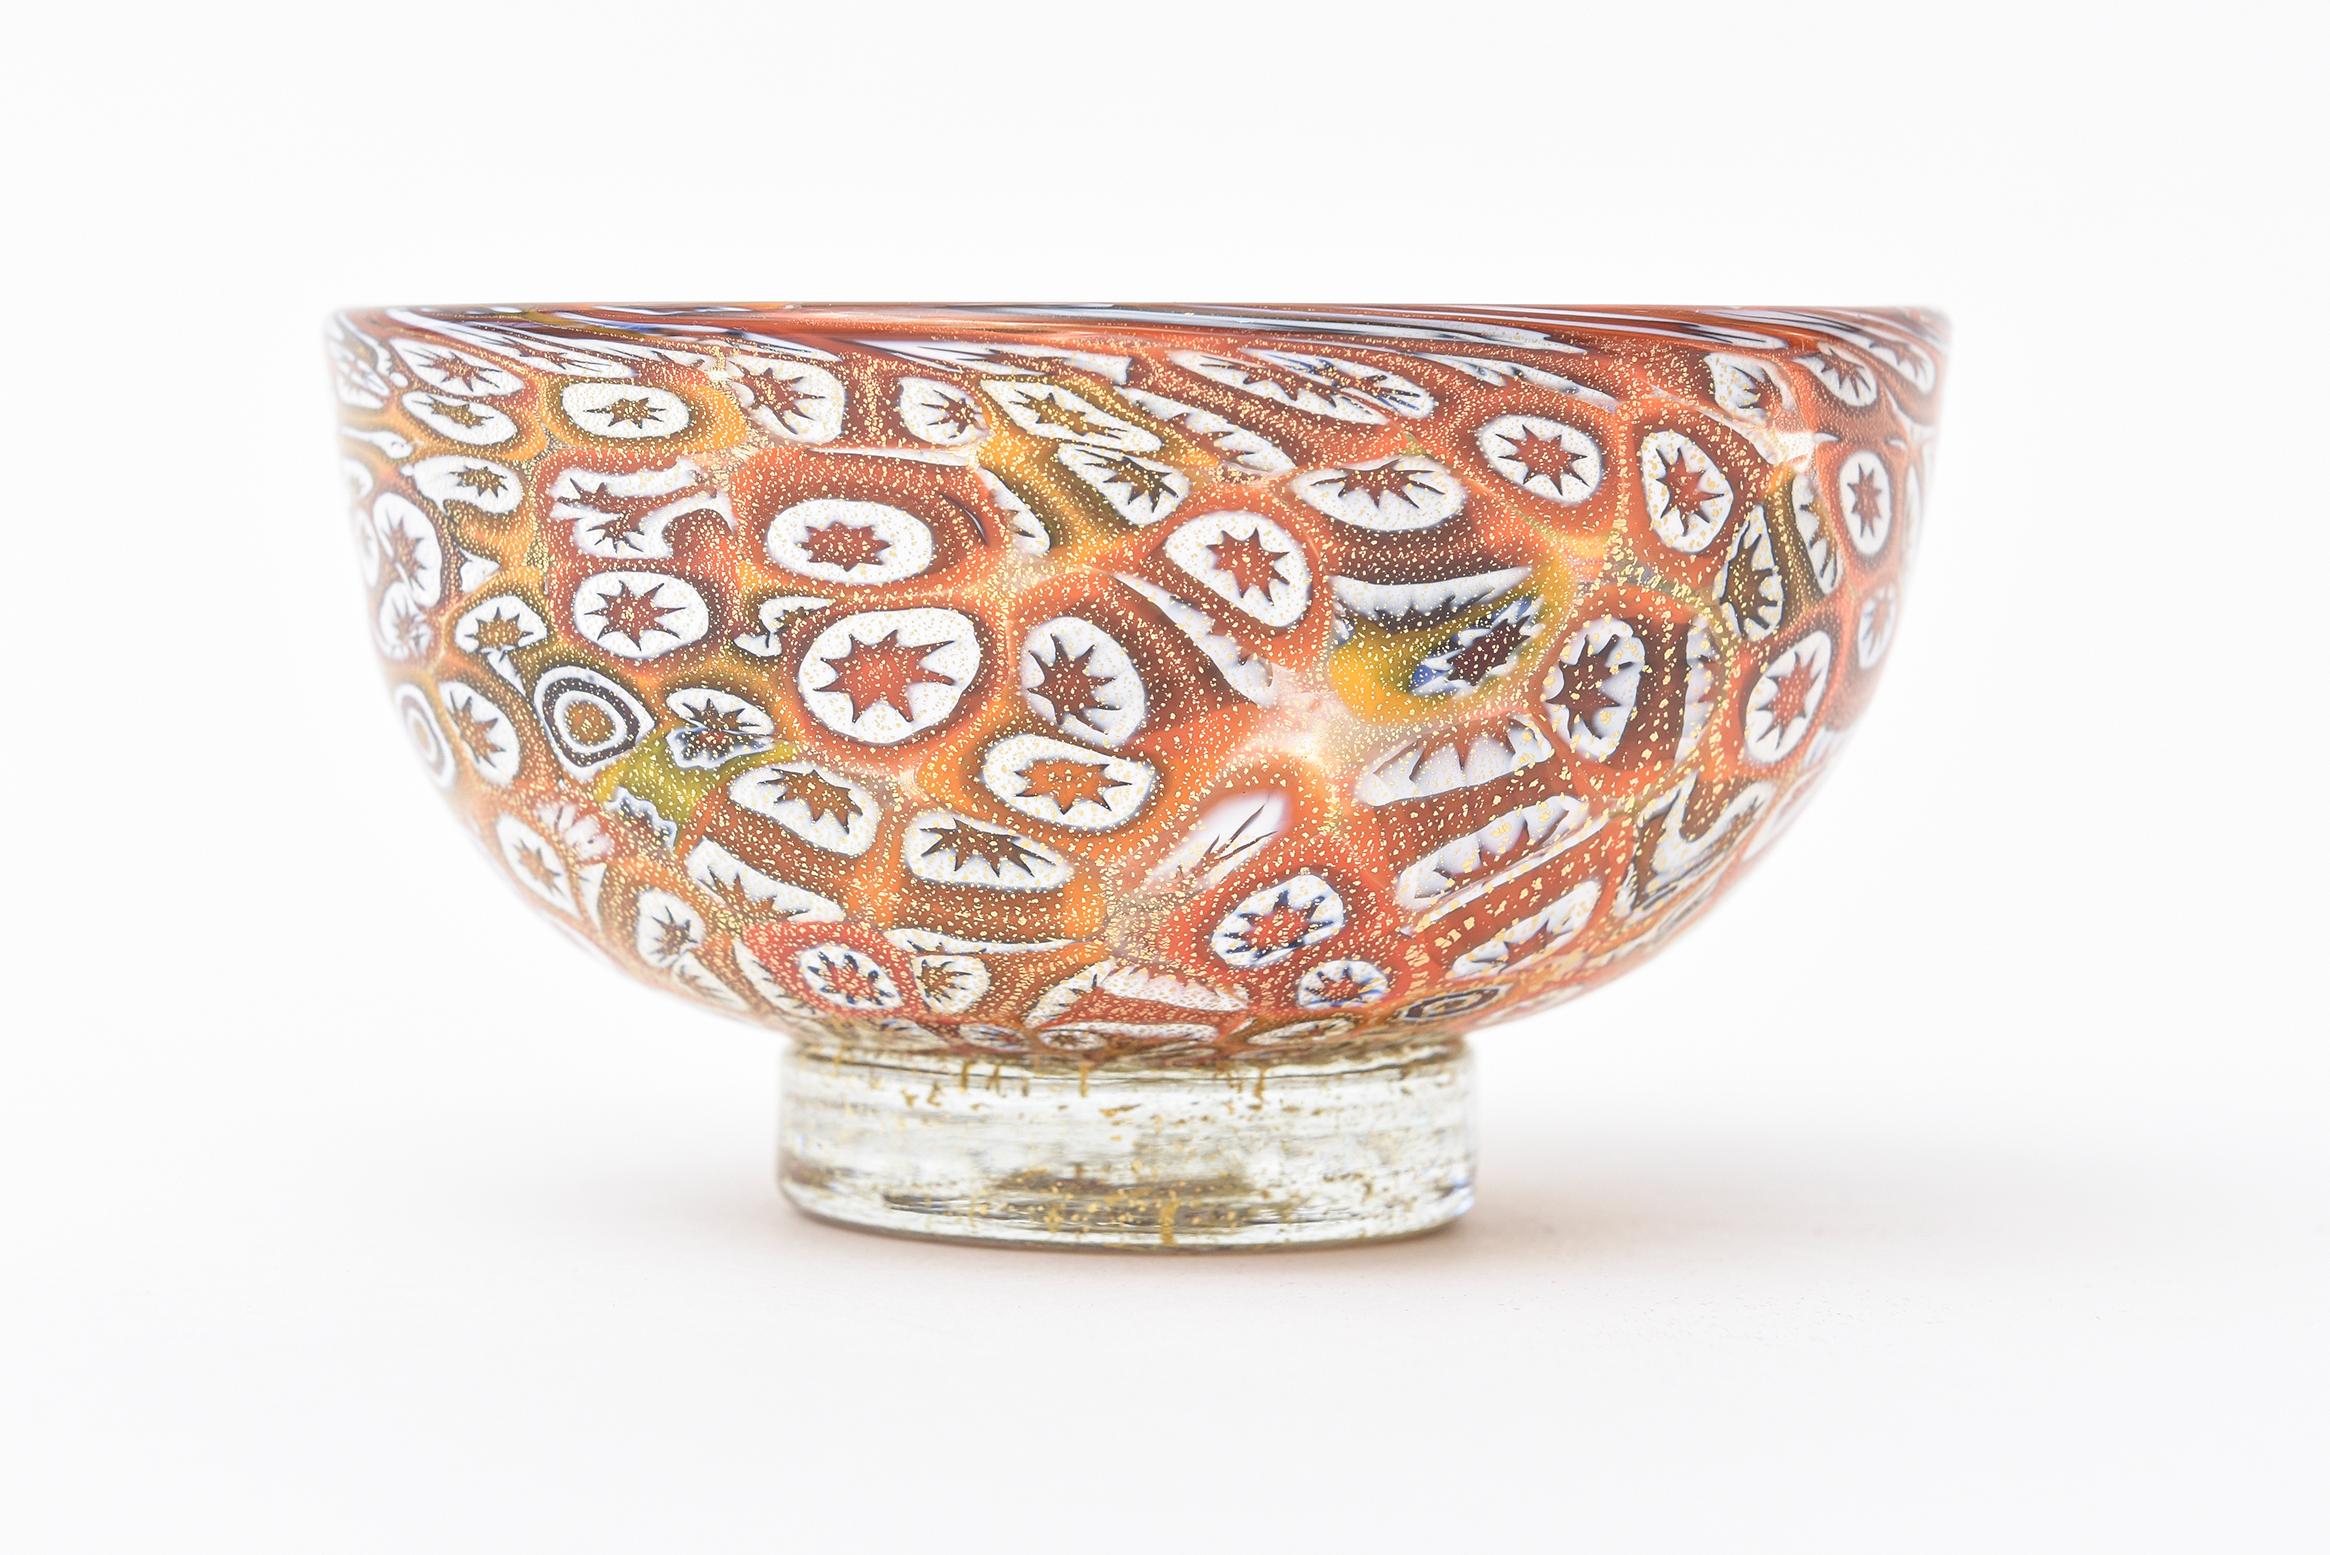 This Italian murano glass bowl by Fratelli Toso has the most incredible colors of the Murrine technique. Murrine are colored patterns made in a glass cane that are revealed when the cane is cut into cross sections. One style is the millefiori which